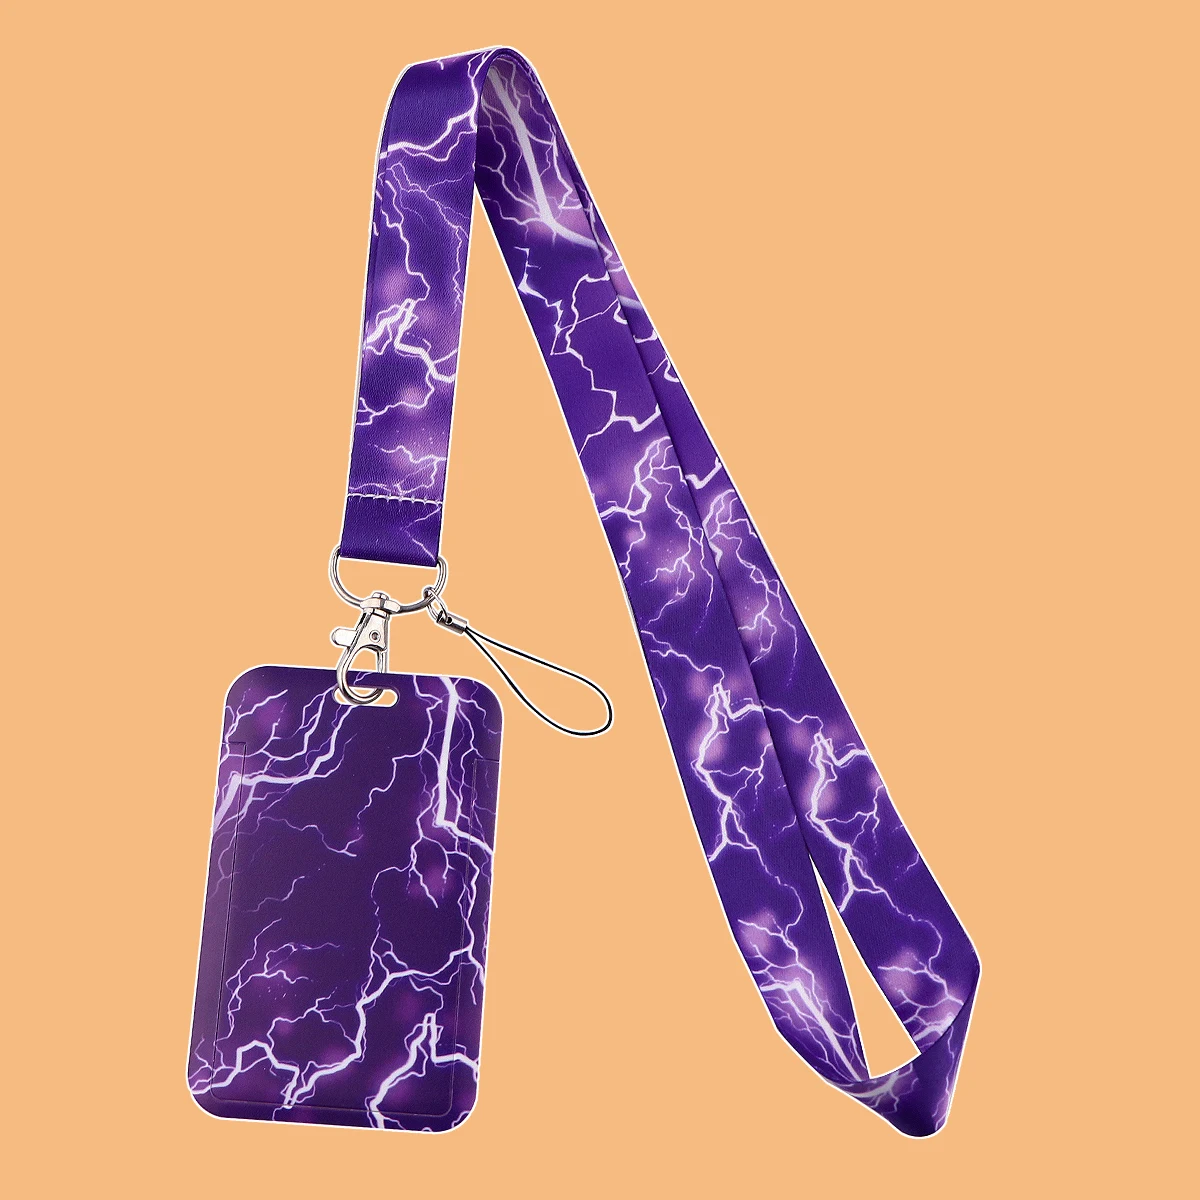 Lightning Printing Lanyard Purple Neck Strap for Key ID Card Cellphone Straps Badge Holder DIY Hanging Rope Phone Accessories